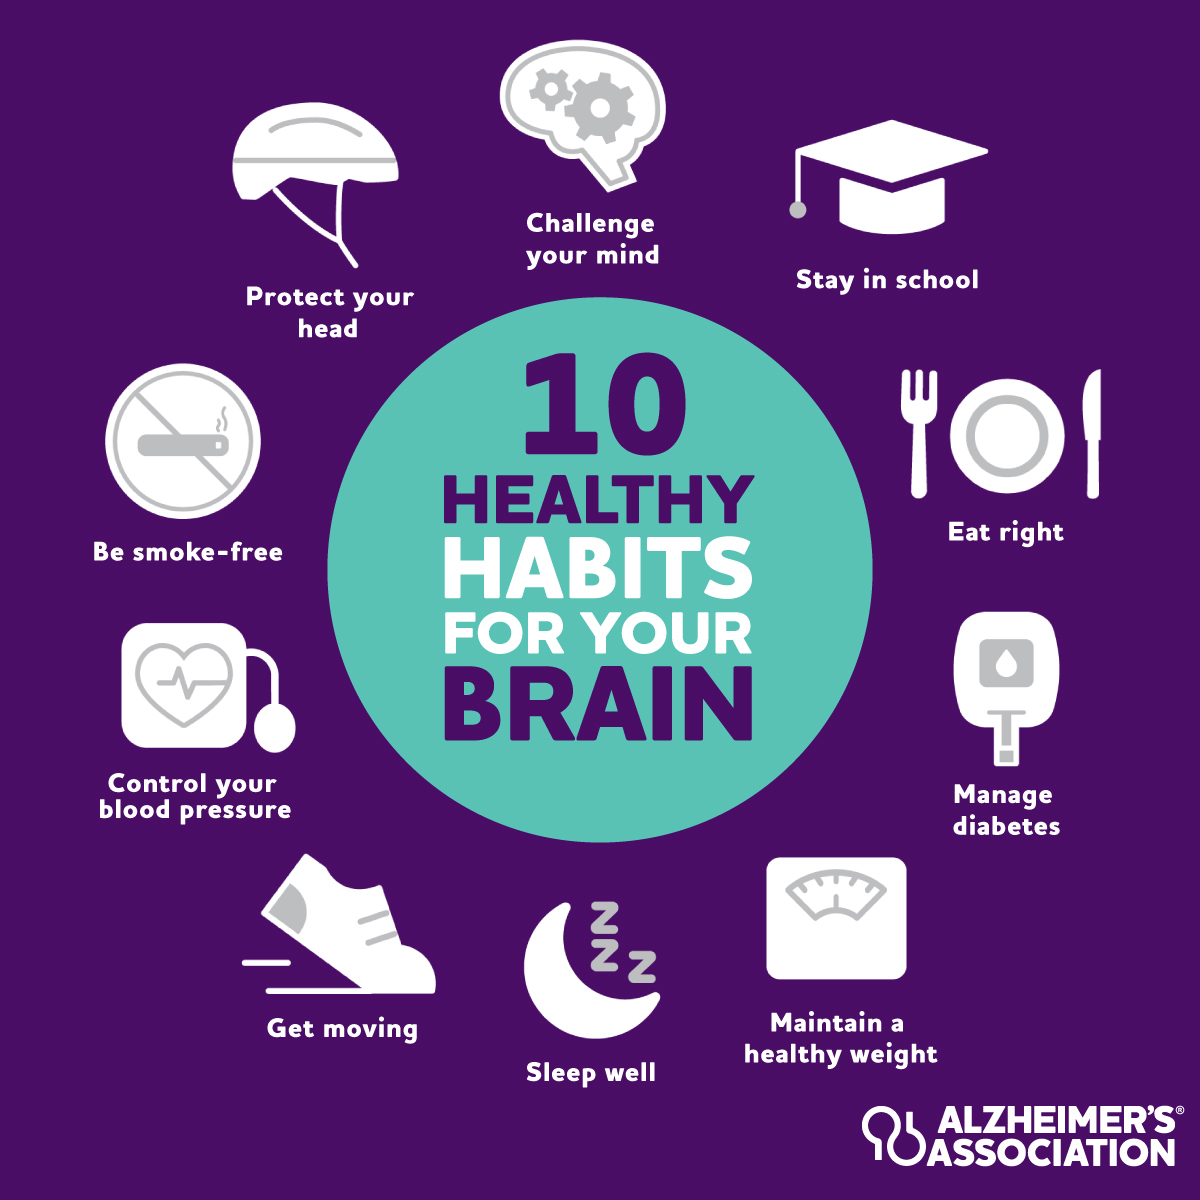 Almost two-thirds of Americans with Alzheimer's are women. By adopting these healthy habits, we can all protect our brain health: alz.org/healthyhabits. #WomensHealthMonth